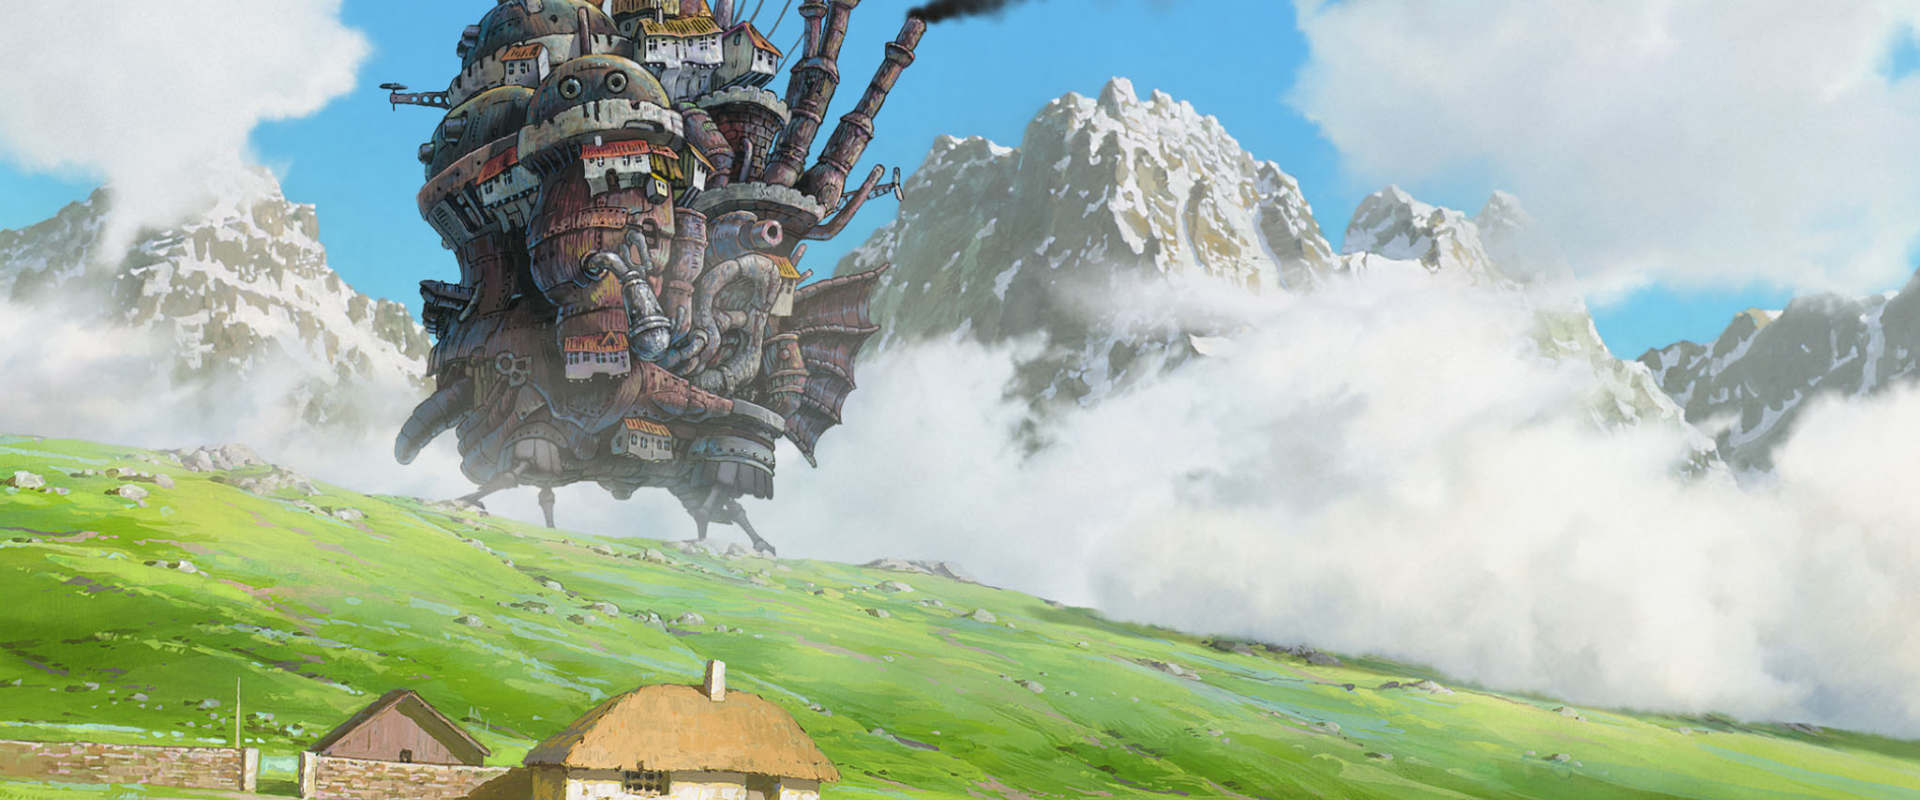 Howl's Moving Castle background 1